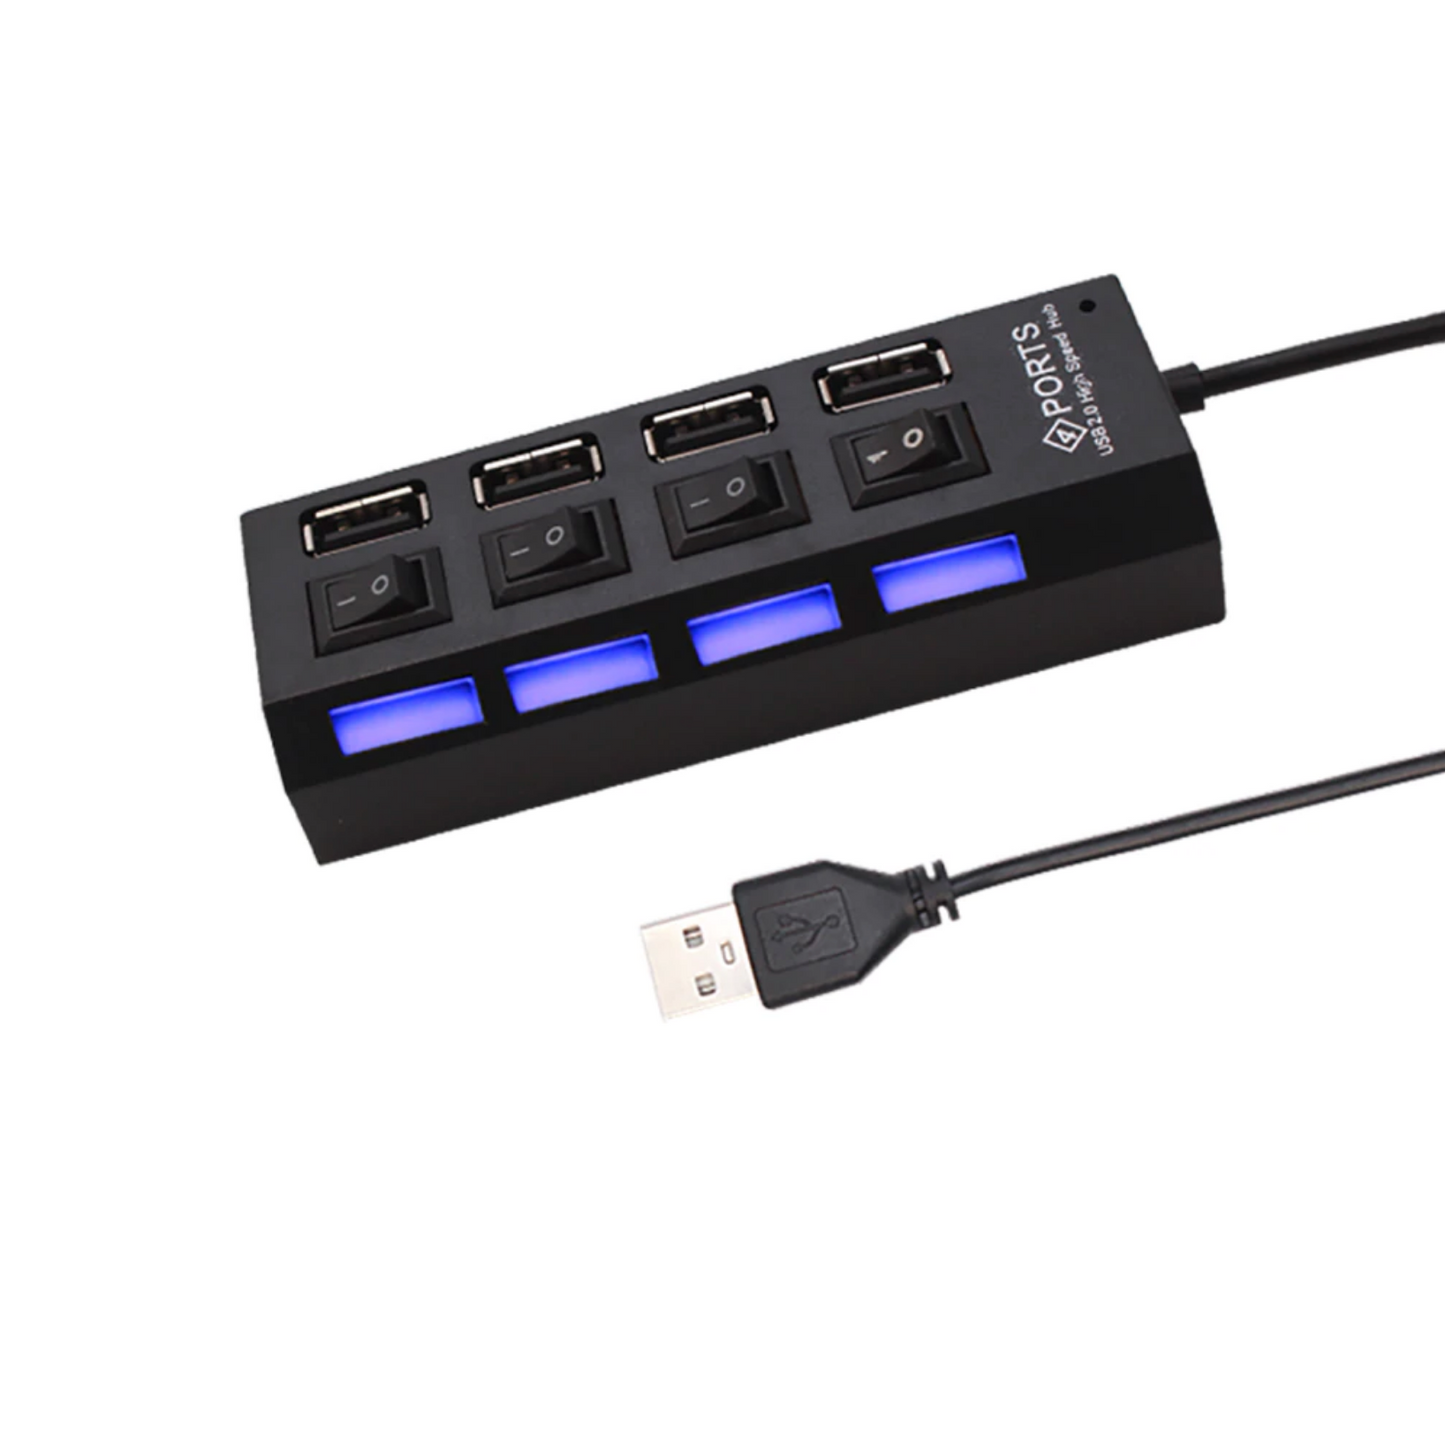 N - 4 Ports High Speed USB 2.0 Hub Splitter Adapter Expander Multi USB With On/Off Switch For Windows PC